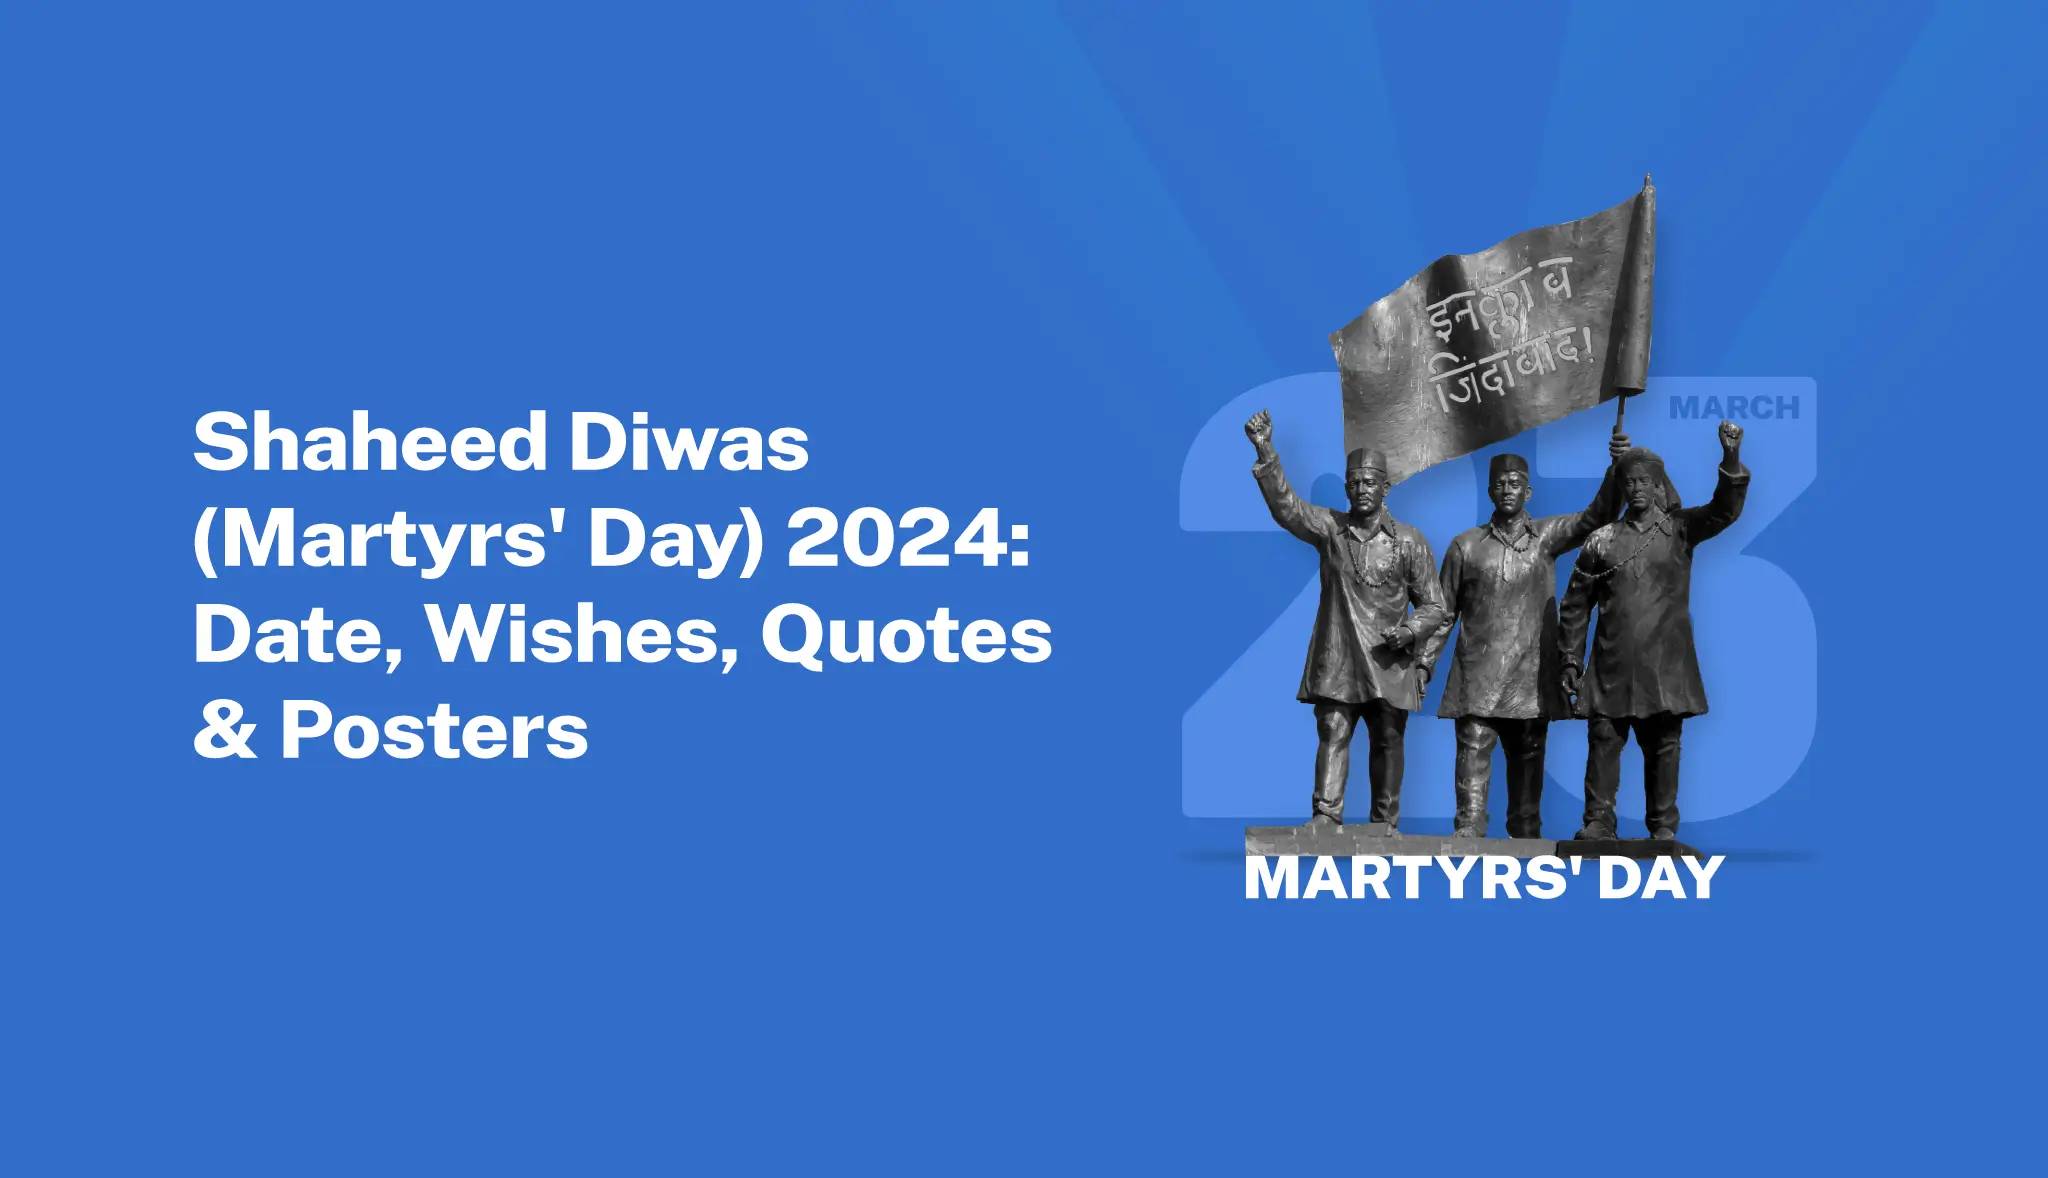 Shaheed Diwas (Martyrs' Day) 2024: Date, Wishes, Quotes & Posters - Postive